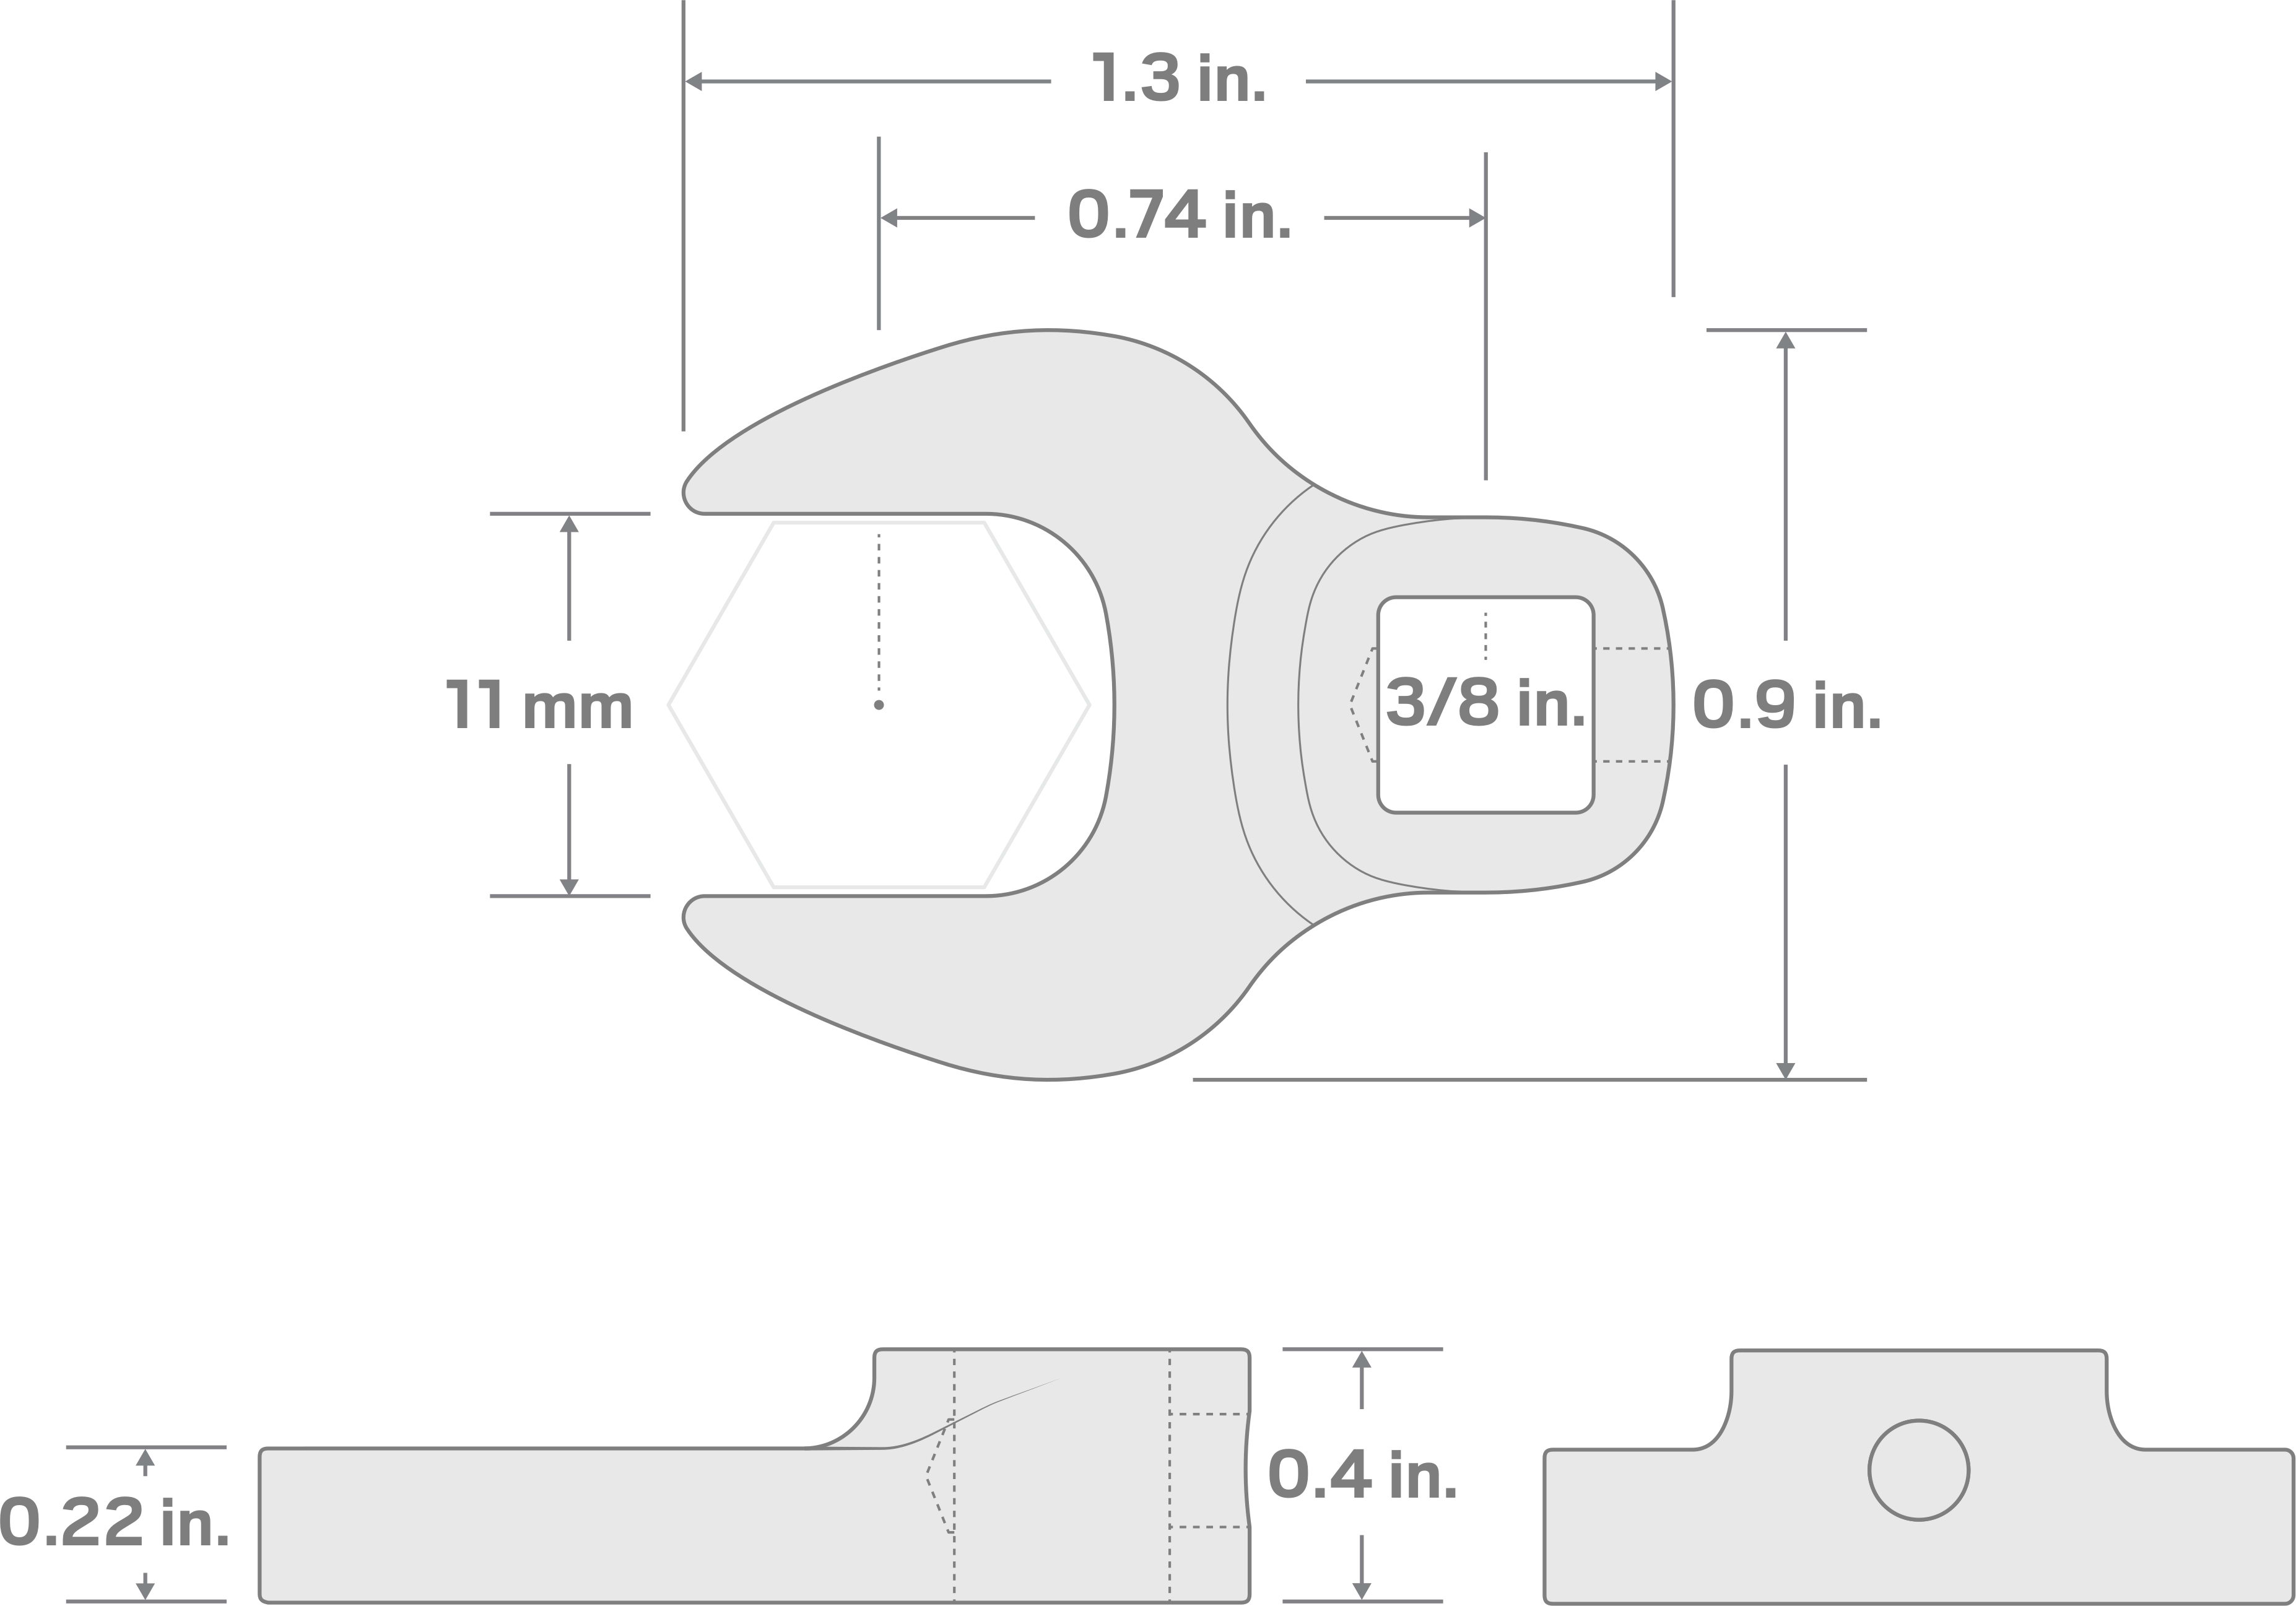 Specs for 3/8 Inch Drive x 11 mm Crowfoot Wrench